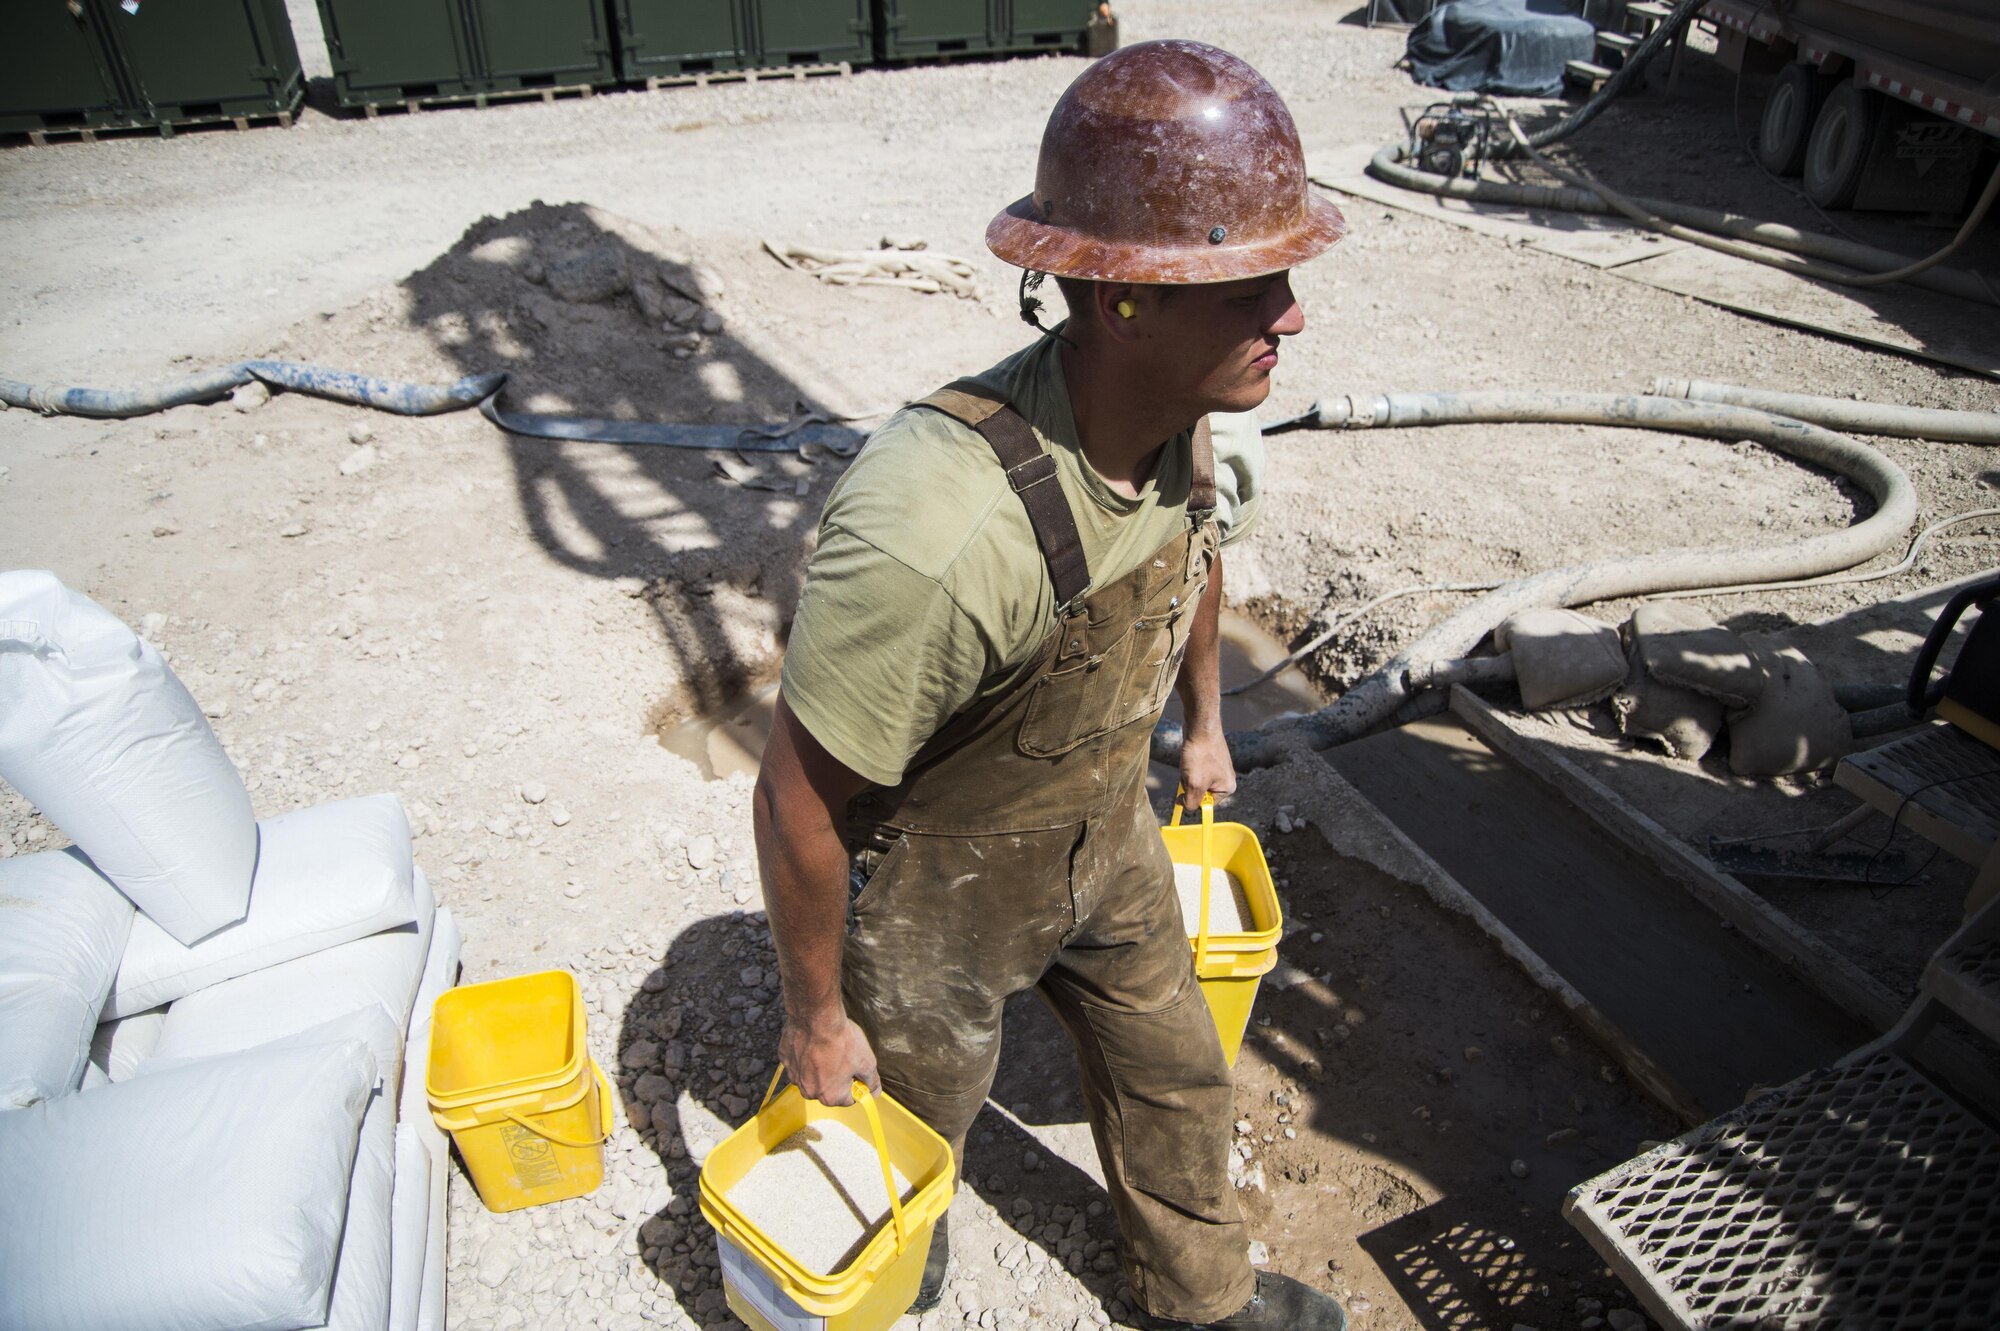 Staff Sgt. Donald Fisher, a well drilling technician assigned to the 557th Expeditionary Red Horse Squadron, carries buckets of sand to pour down the well site at Al Taqaddum Air Base, Iraq, June 2, 2016. The 557th ERHS well drilling team are obtaining an organic water source for Al Taqaddum. Red Horse is helping to improve Iraq's infrastructure in support of the Government of Iraq.
(U.S. Air Force photo/Staff Sgt. Larry E. Reid Jr., Released)